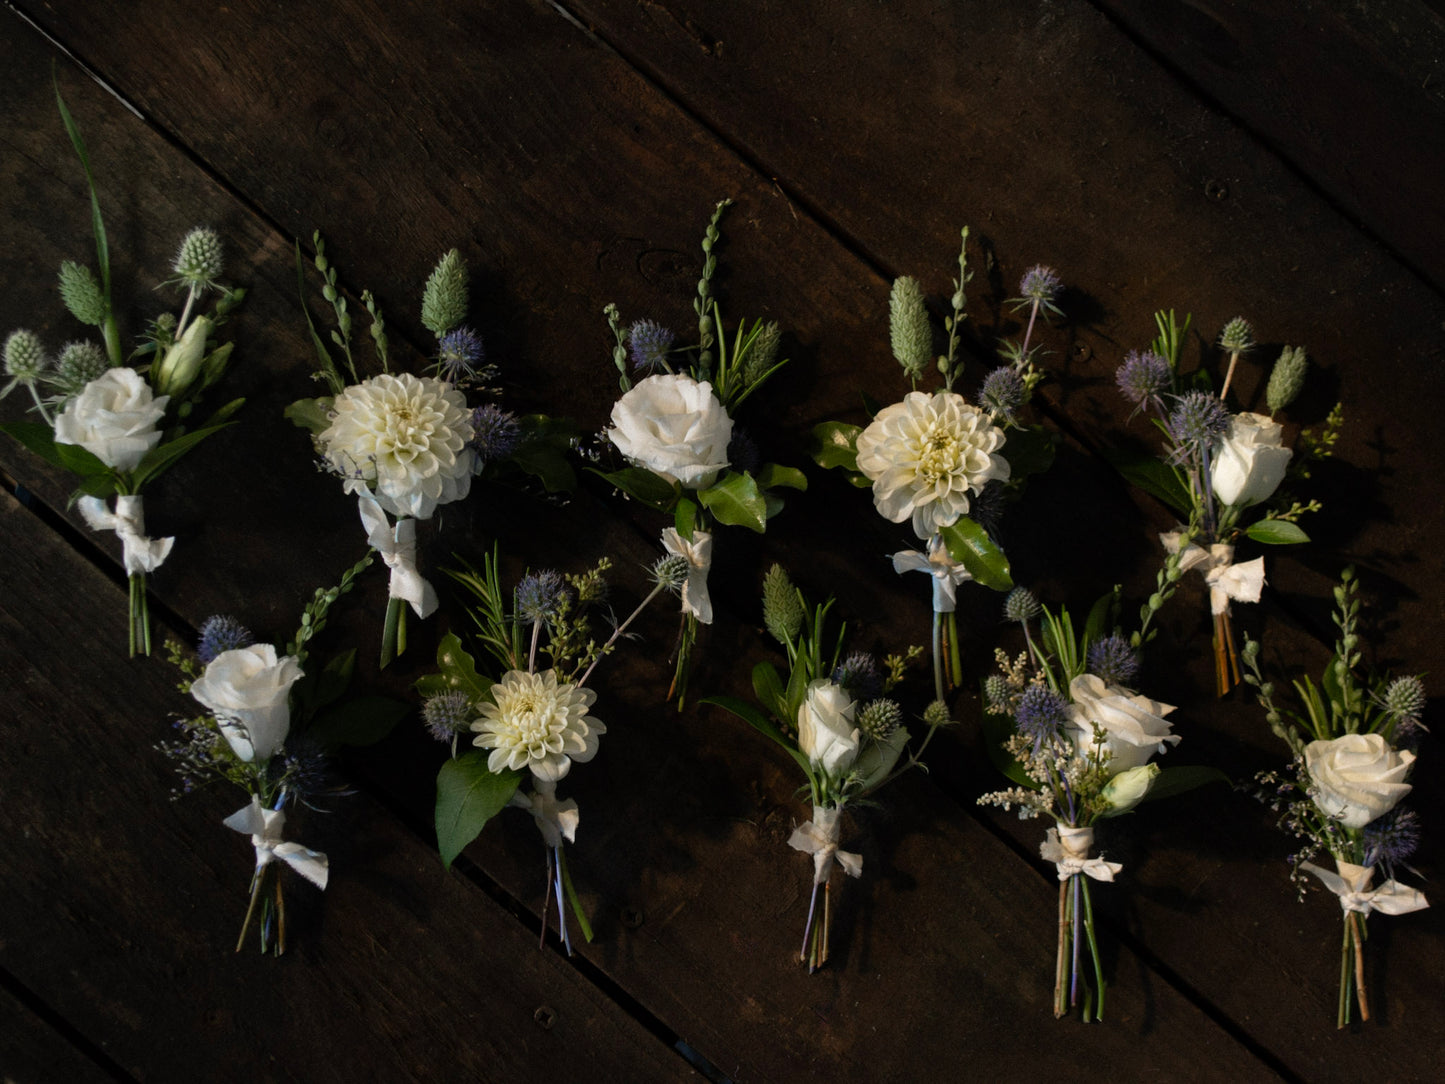 The 'Best in Bloom' Boutonniere